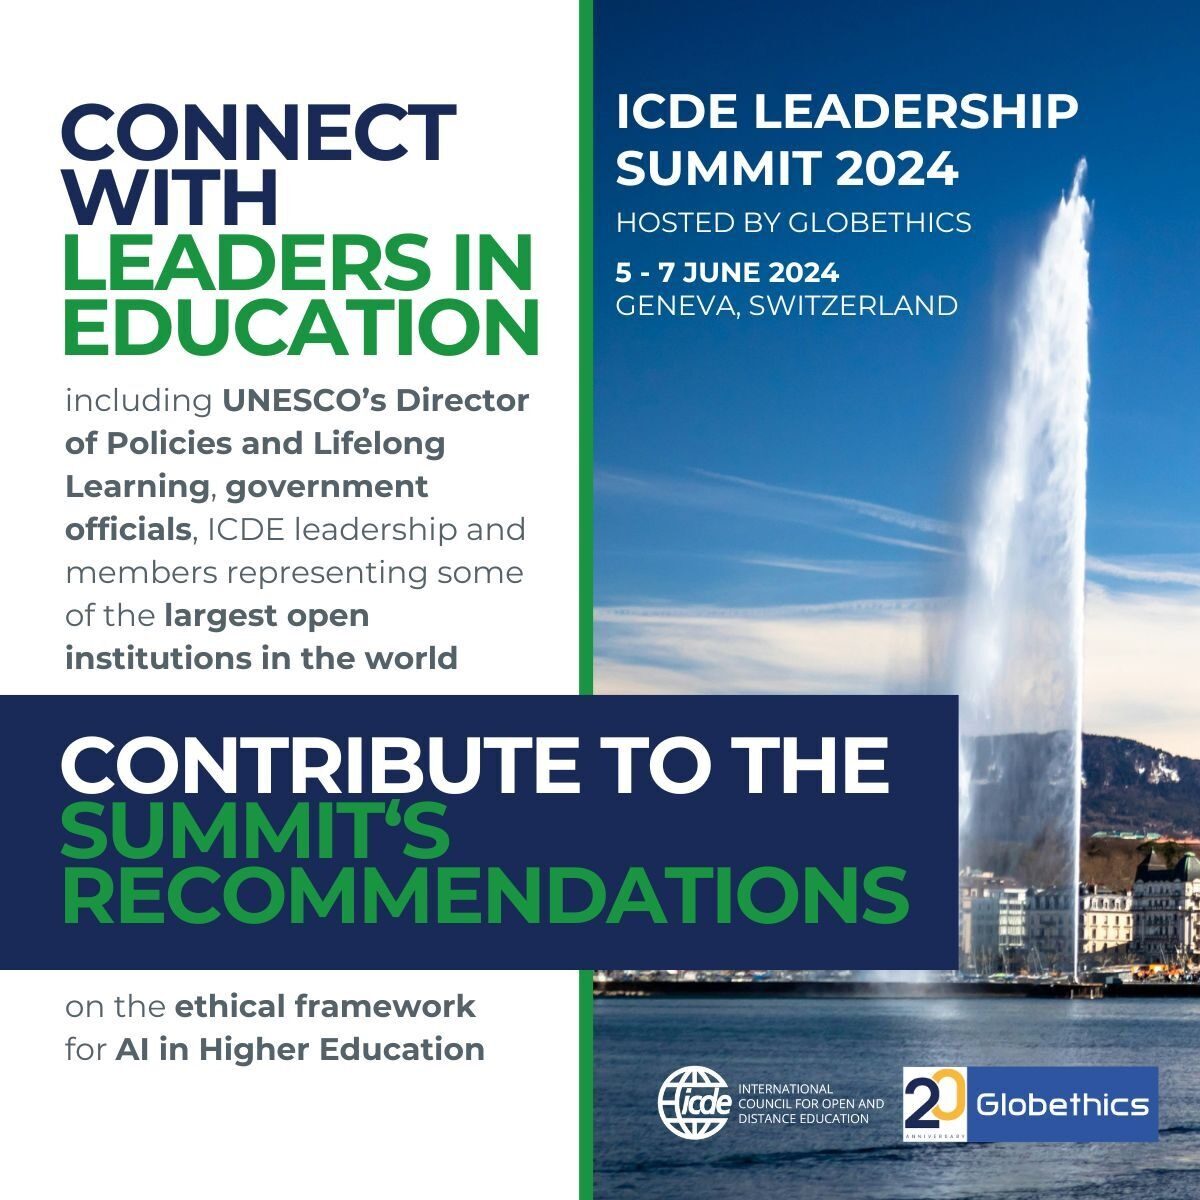 📣 Share your insights & expertise for the #ICDELS24 policy recommendations on #AI & #HigherEducation. 

👥 The recommendations will be developed for educational authorities, shaping the future of education.

Buy your ticket by 30 April for 15% discount 🔗globethics.net/events/icde-le…